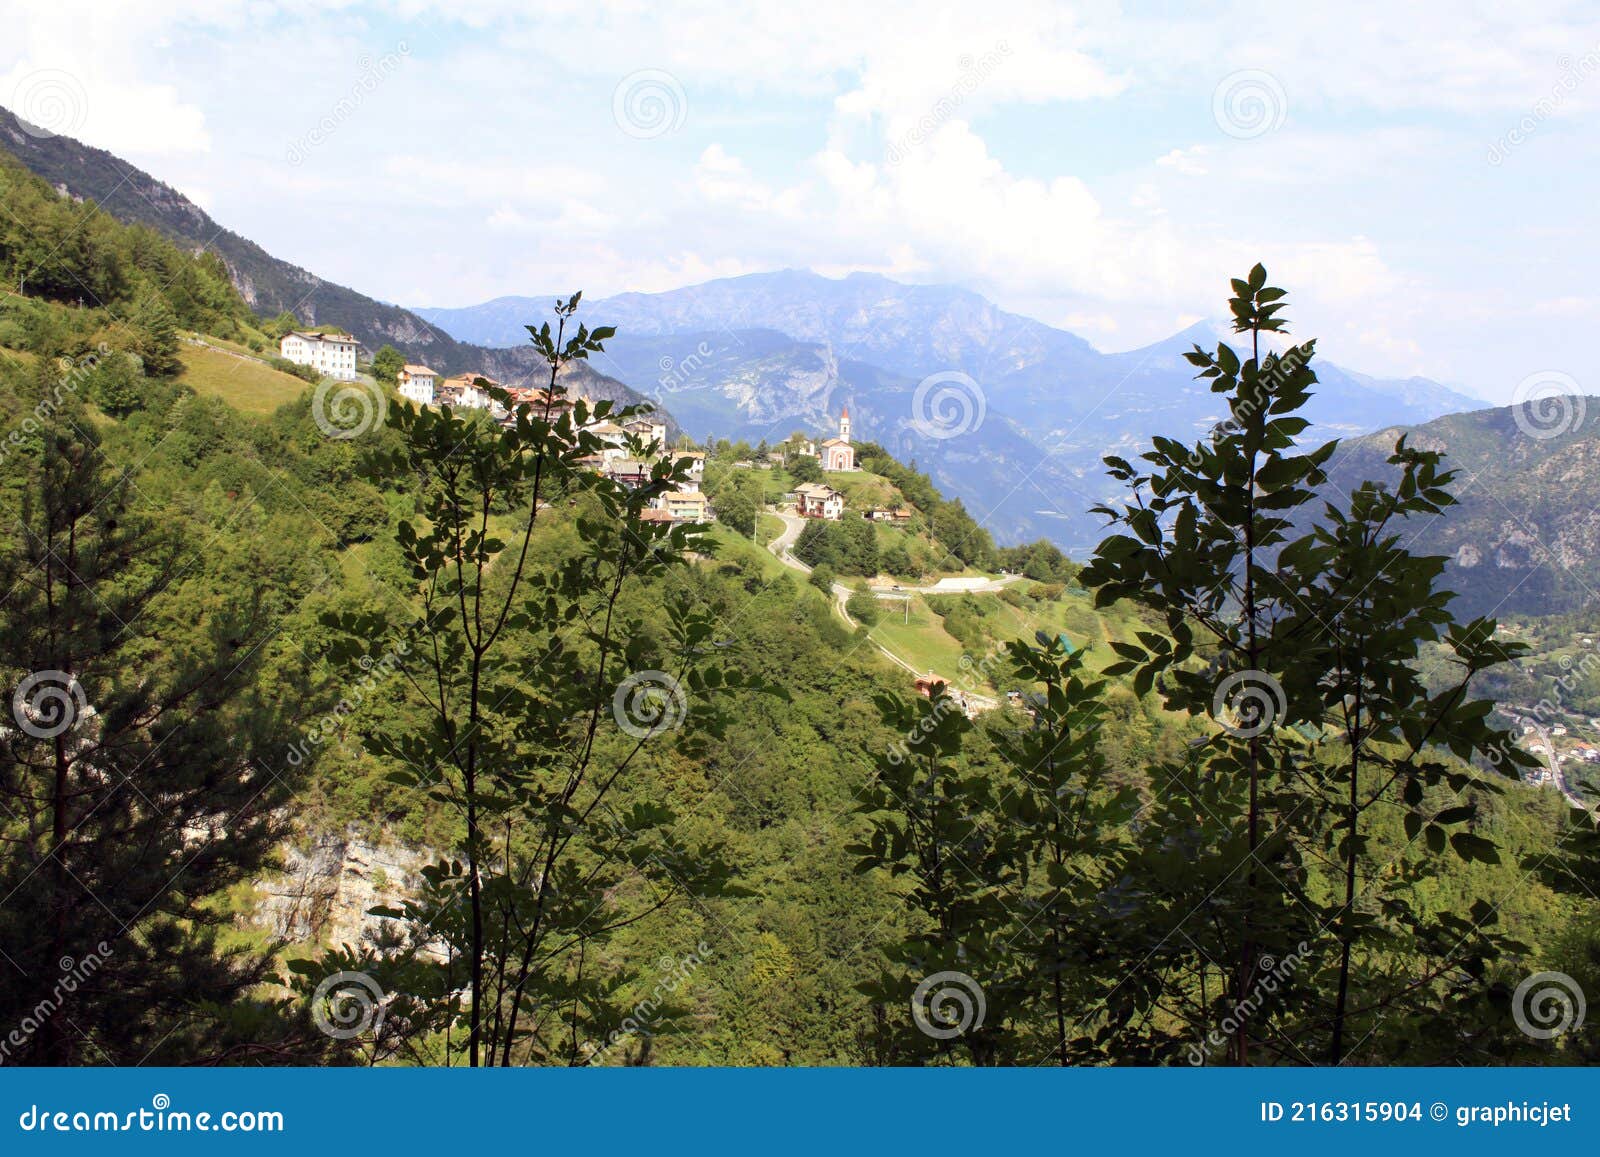 mountain landscape with the town of guardia, trentino, italy